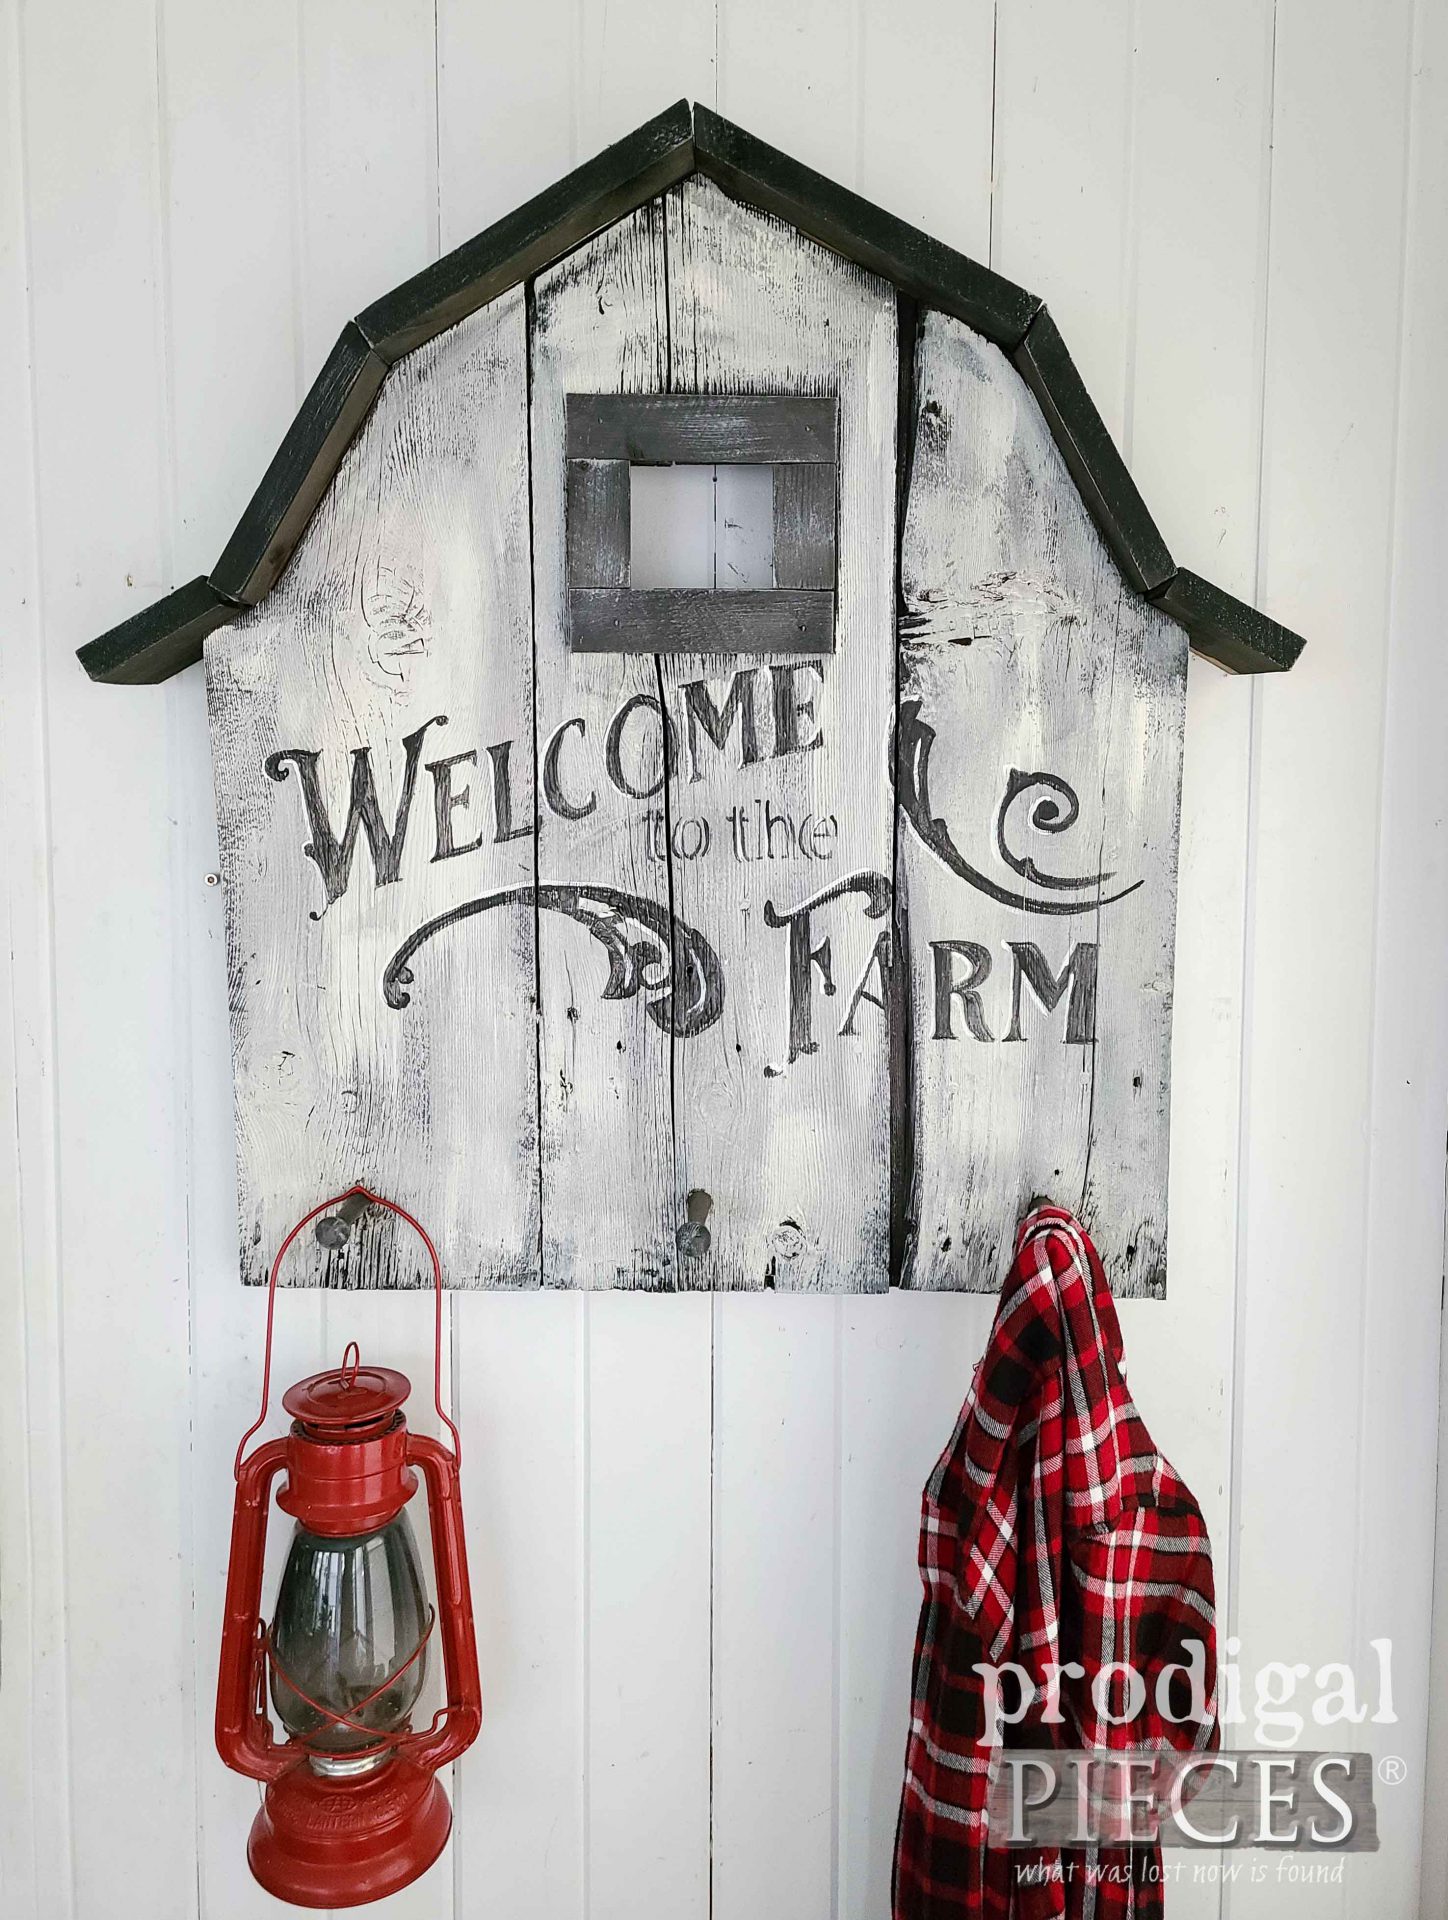 Welcome to the Farm Sign Rack from Reclaimed Wood Barn by Larissa of Prodigal Pieces | prodigalpieces.com #prodgialpieces #farm #reclaimed #diy